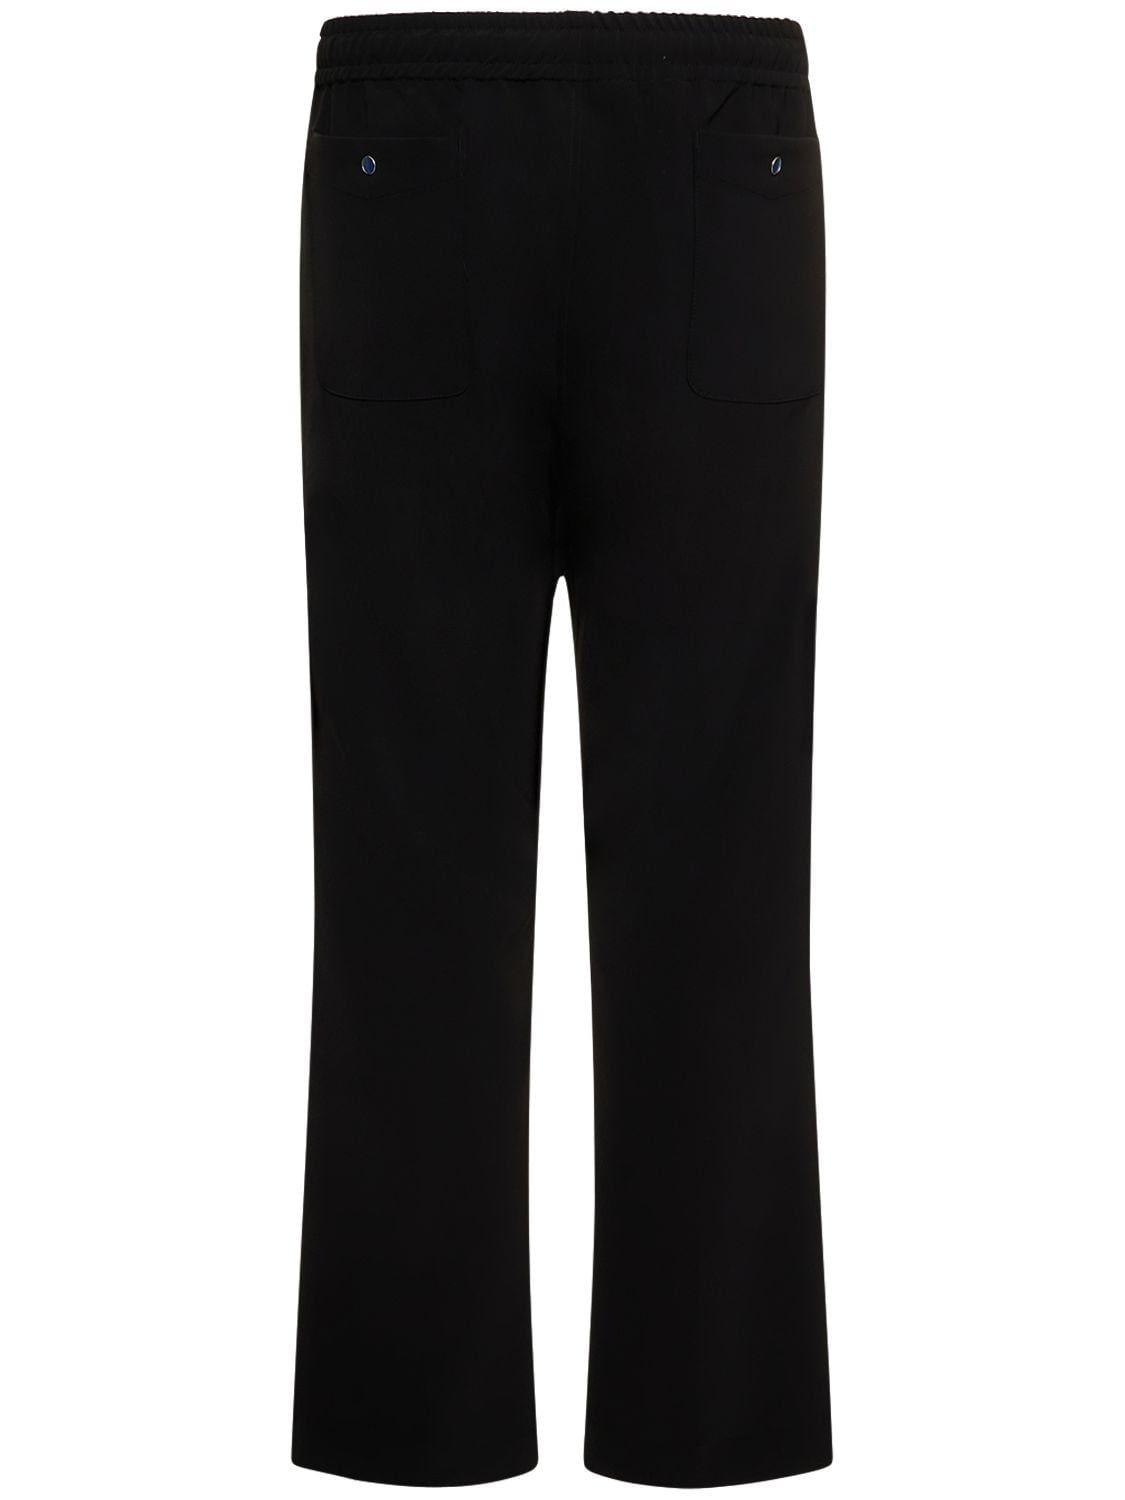 Needles Embroidered Tech Blend Cowboy Pants in Black for Men